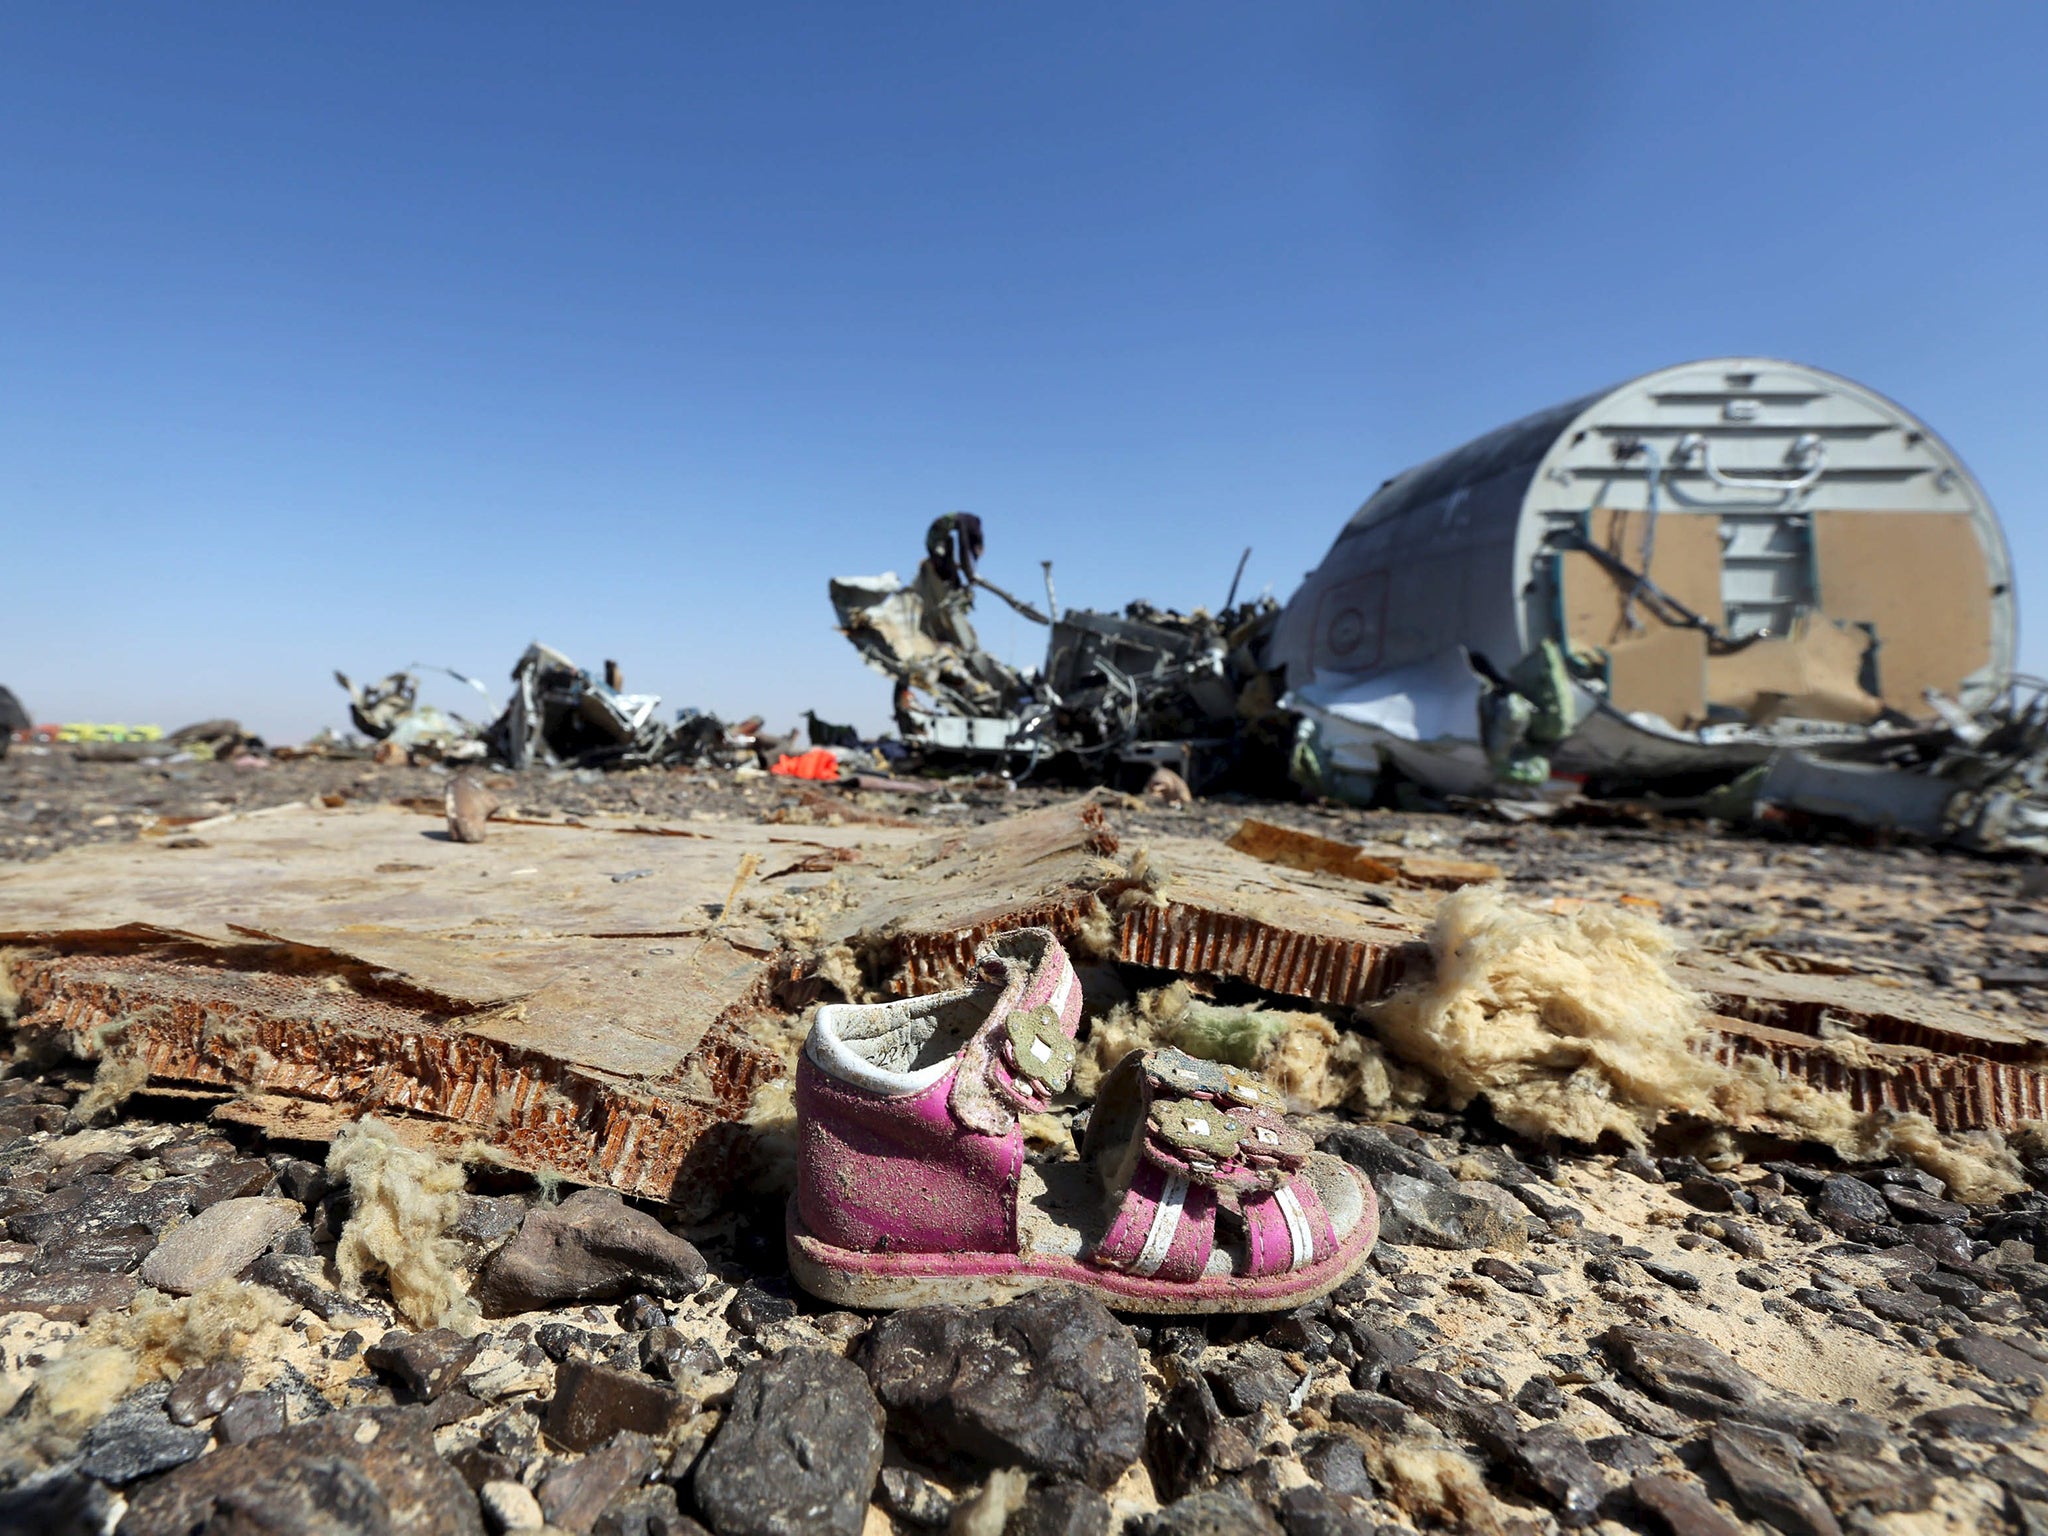 A child's shoe is seen in front of debris from a Russian airliner which crashed at the Hassana area in Arish city, north Egypt. Russia has grounded Airbus A321 jets flown by the Kogalymavia airline, Interfax news agency reported , after one of its fleet crashed in Egypt's Sinai Peninsula, killing all 224 people on board